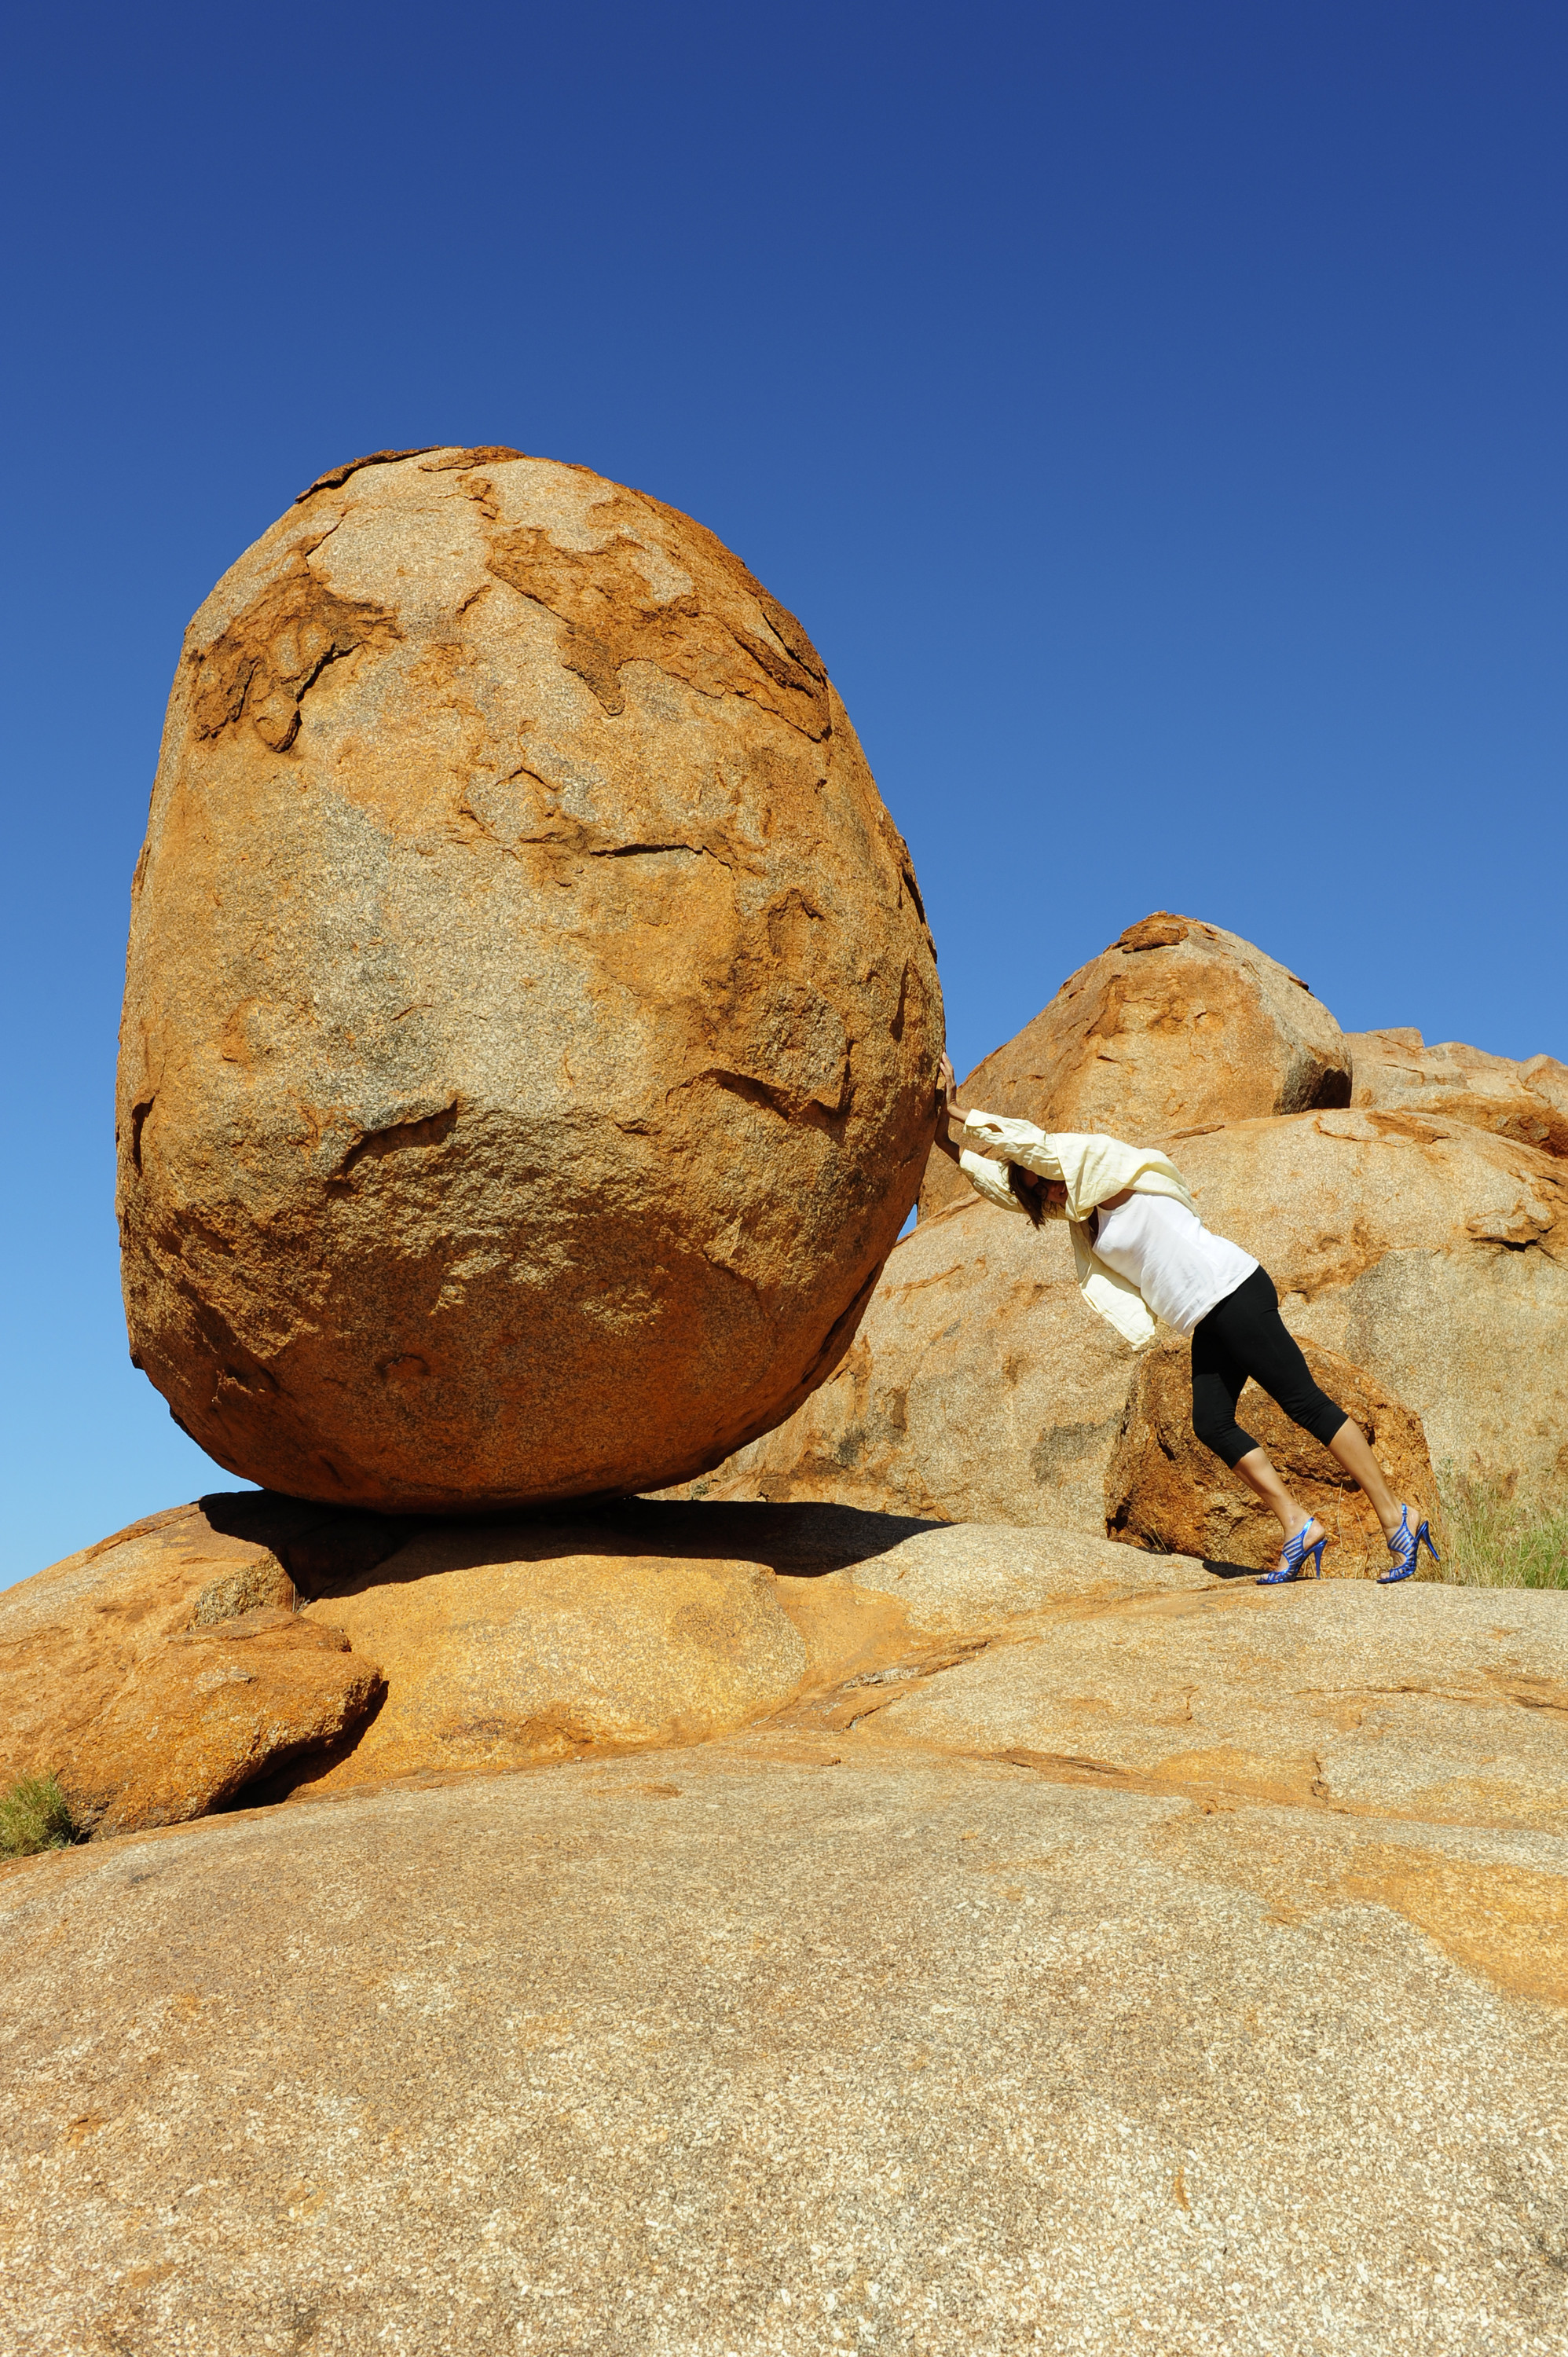 The Benefit of a Really Big Rock | Positive Business DC